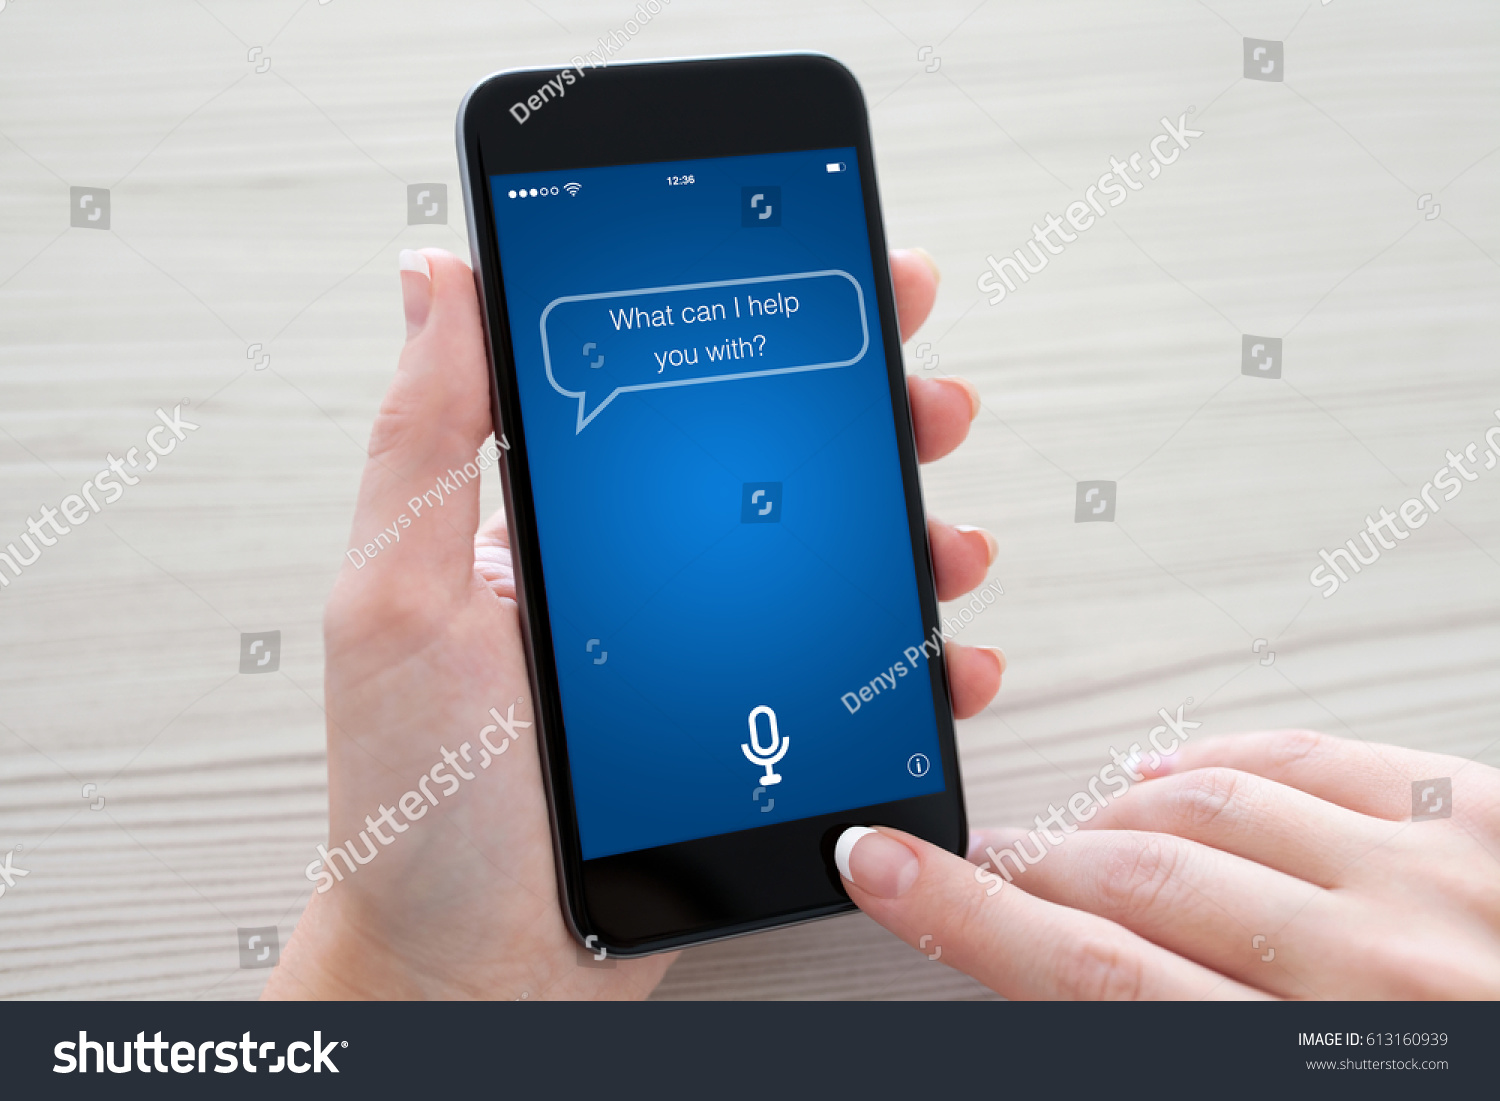 Women hands holding phone with app personal assistant on screen over table
 #613160939